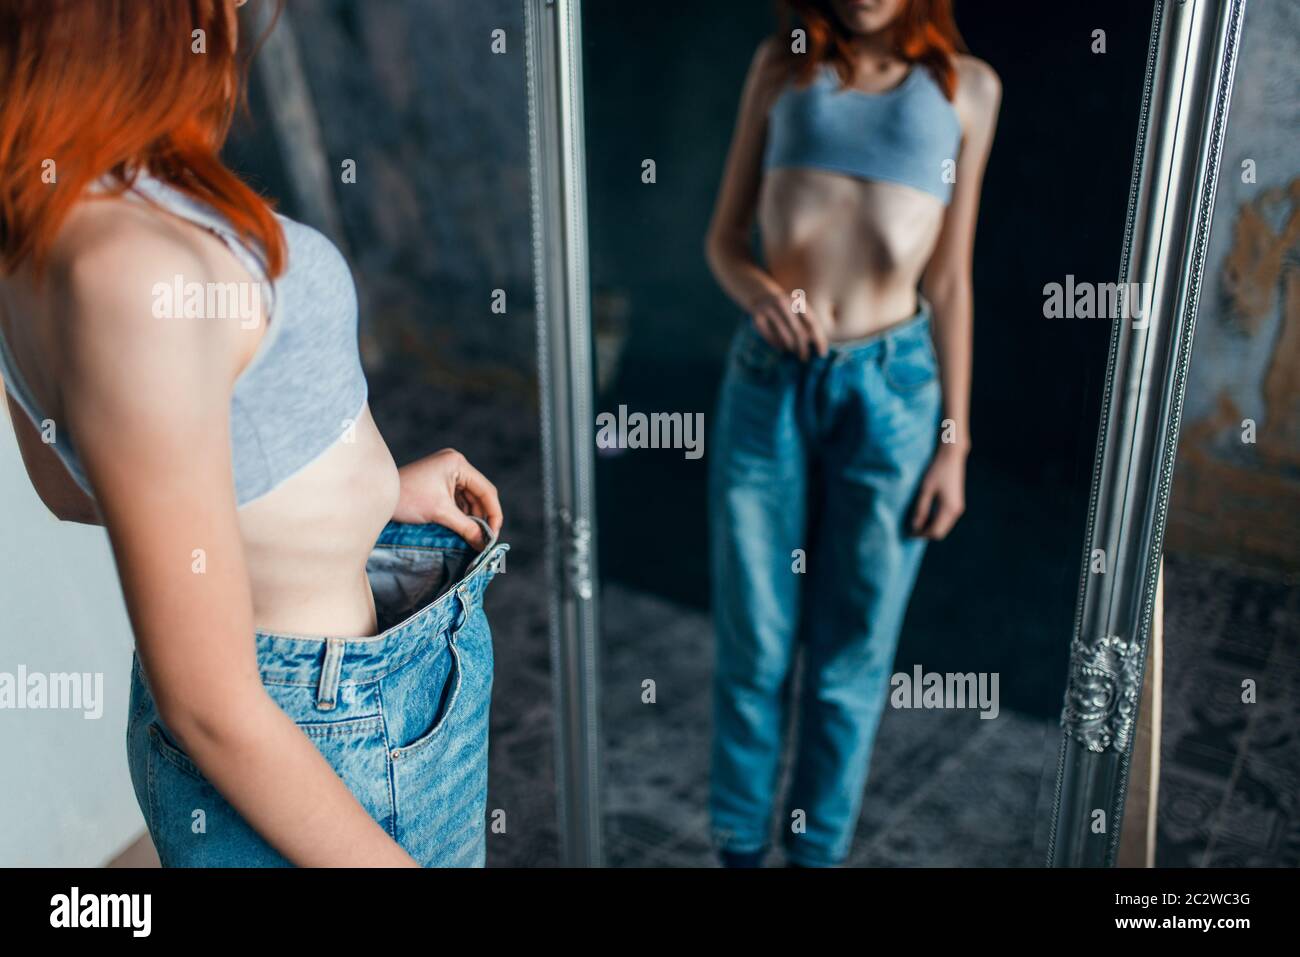 Thin woman tries on big size jeans against mirror, weight loss, anorexia. Fat or calories burning concept, medical illness Stock Photo